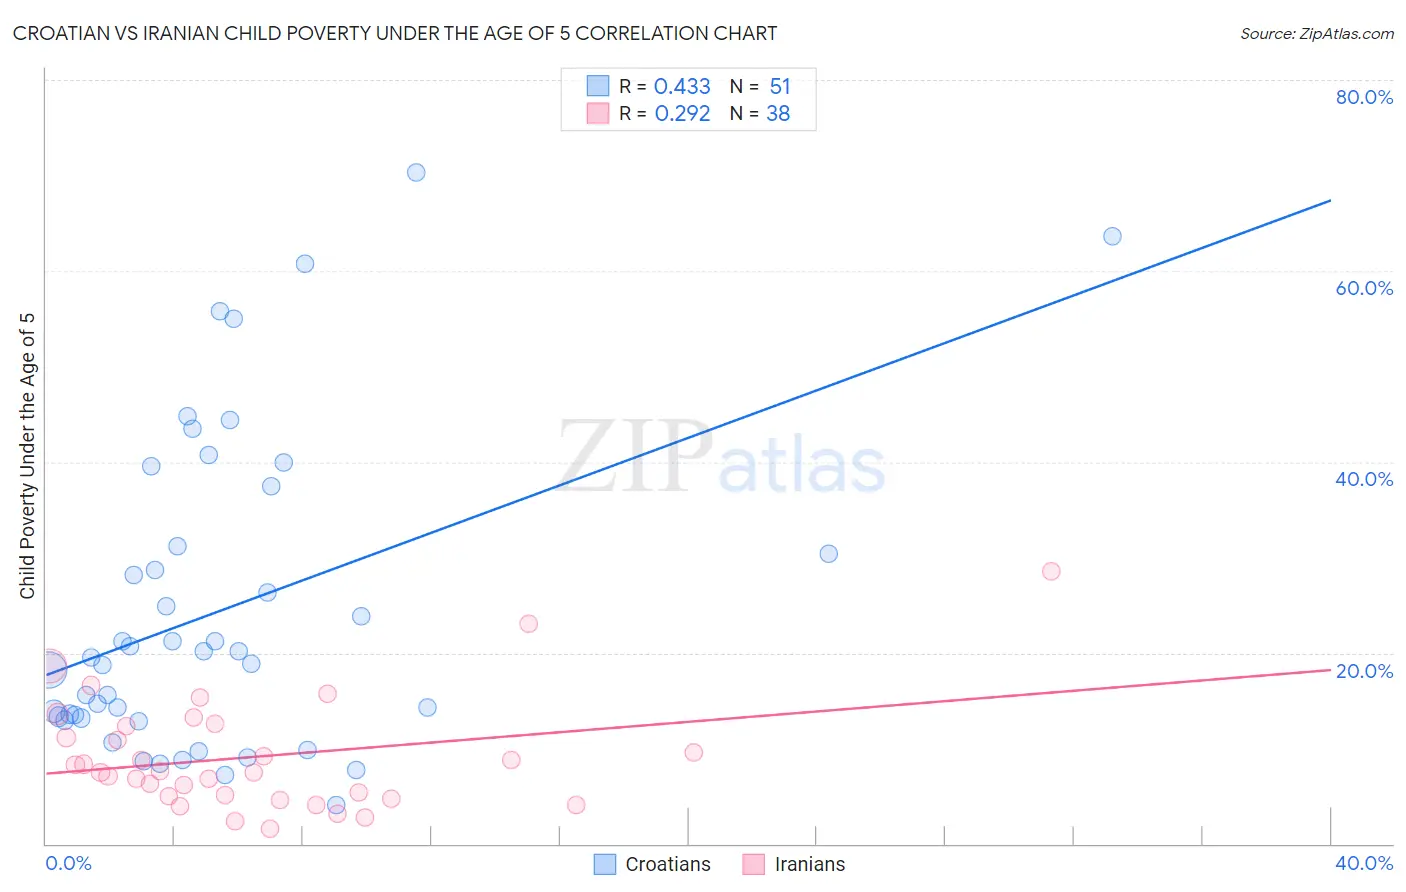 Croatian vs Iranian Child Poverty Under the Age of 5